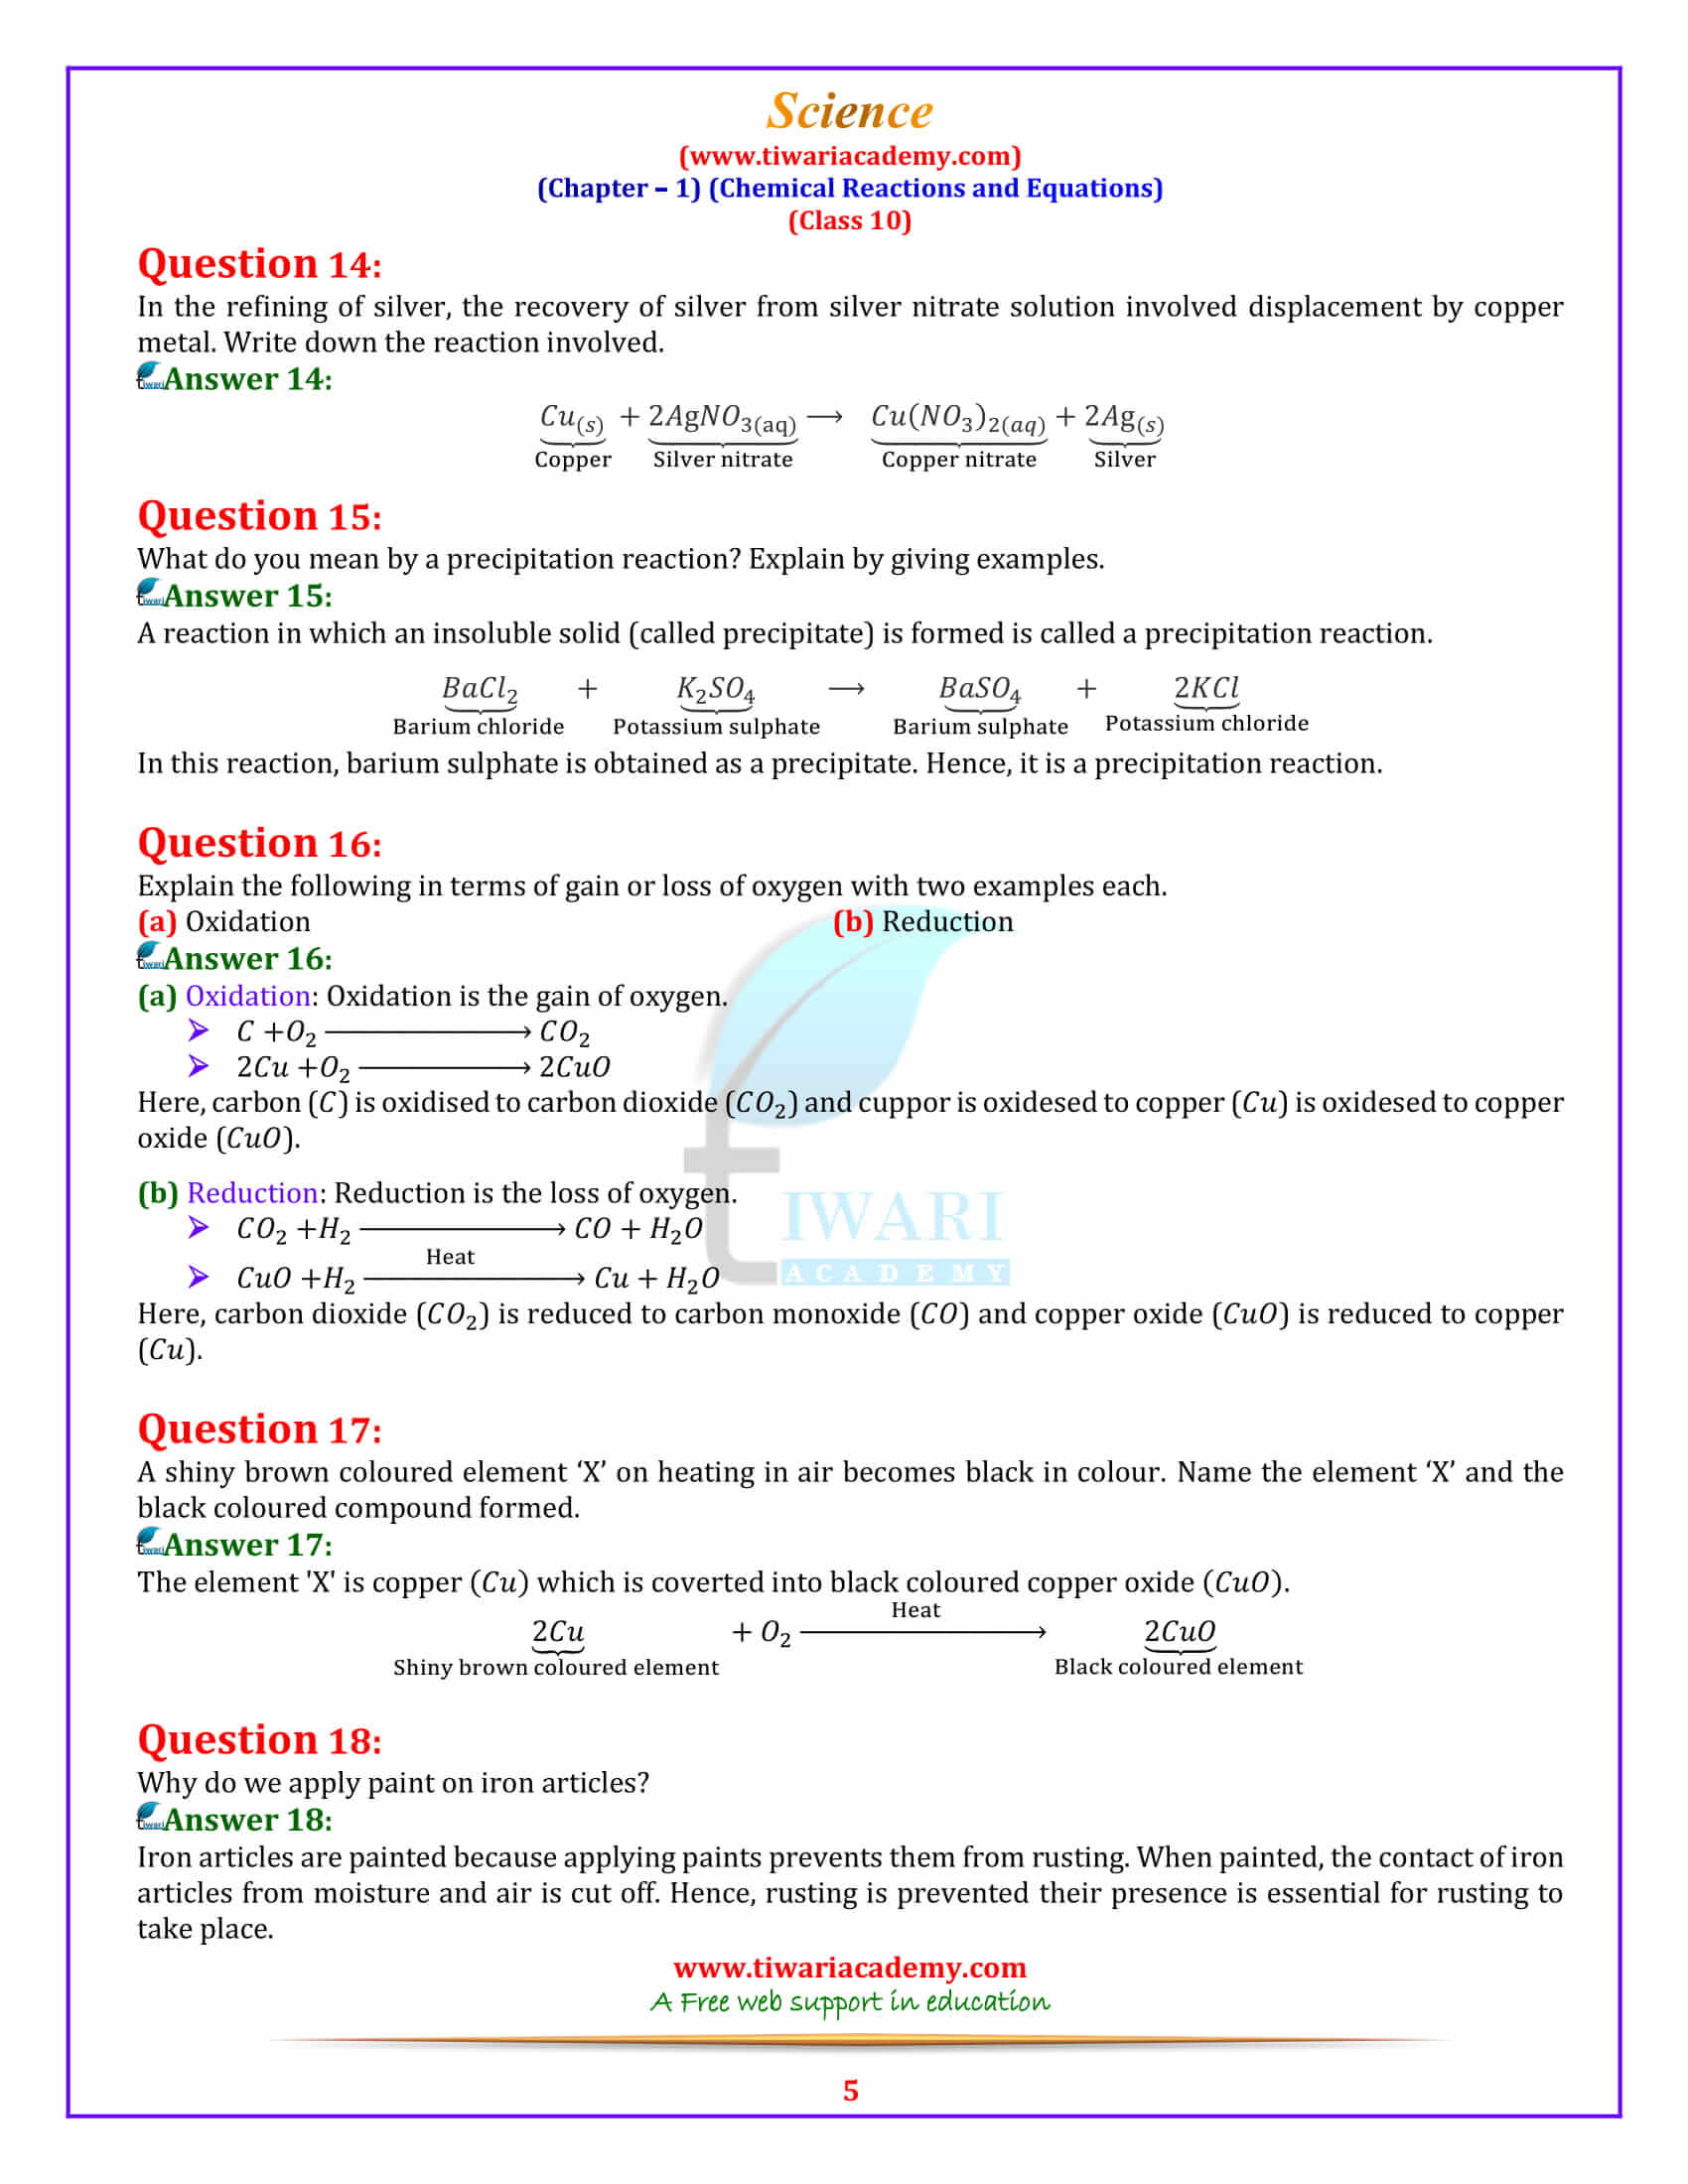 NCERT Solutions for Class 10 Science Chapter 1 Exercises guide free